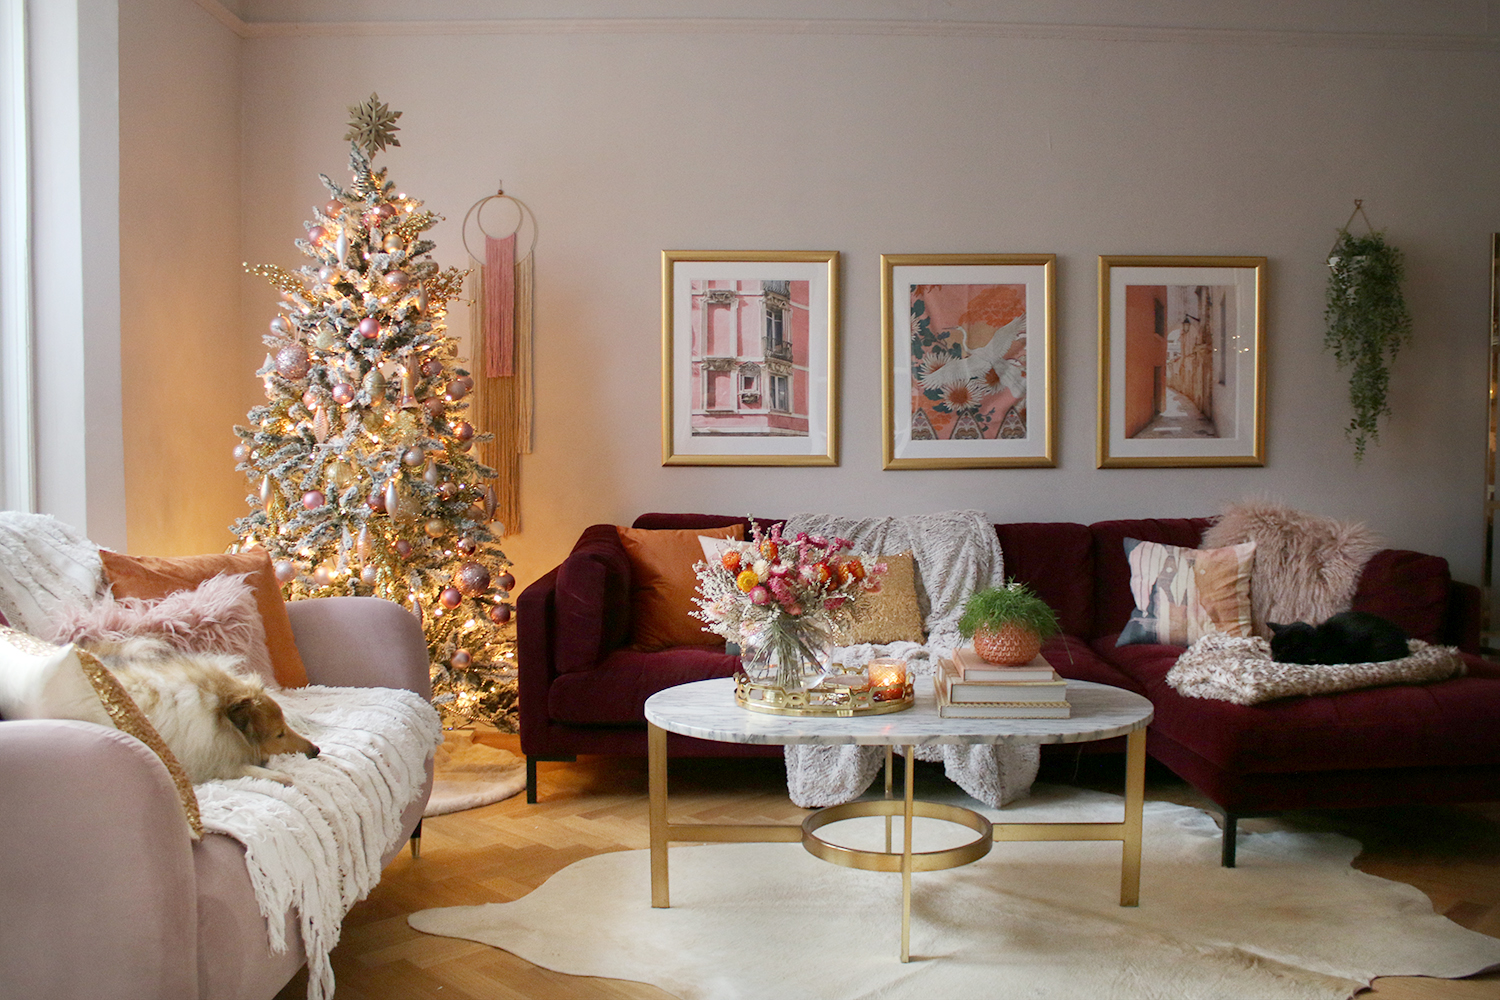 How to Style a Christmas Tree - Swoon Worthy